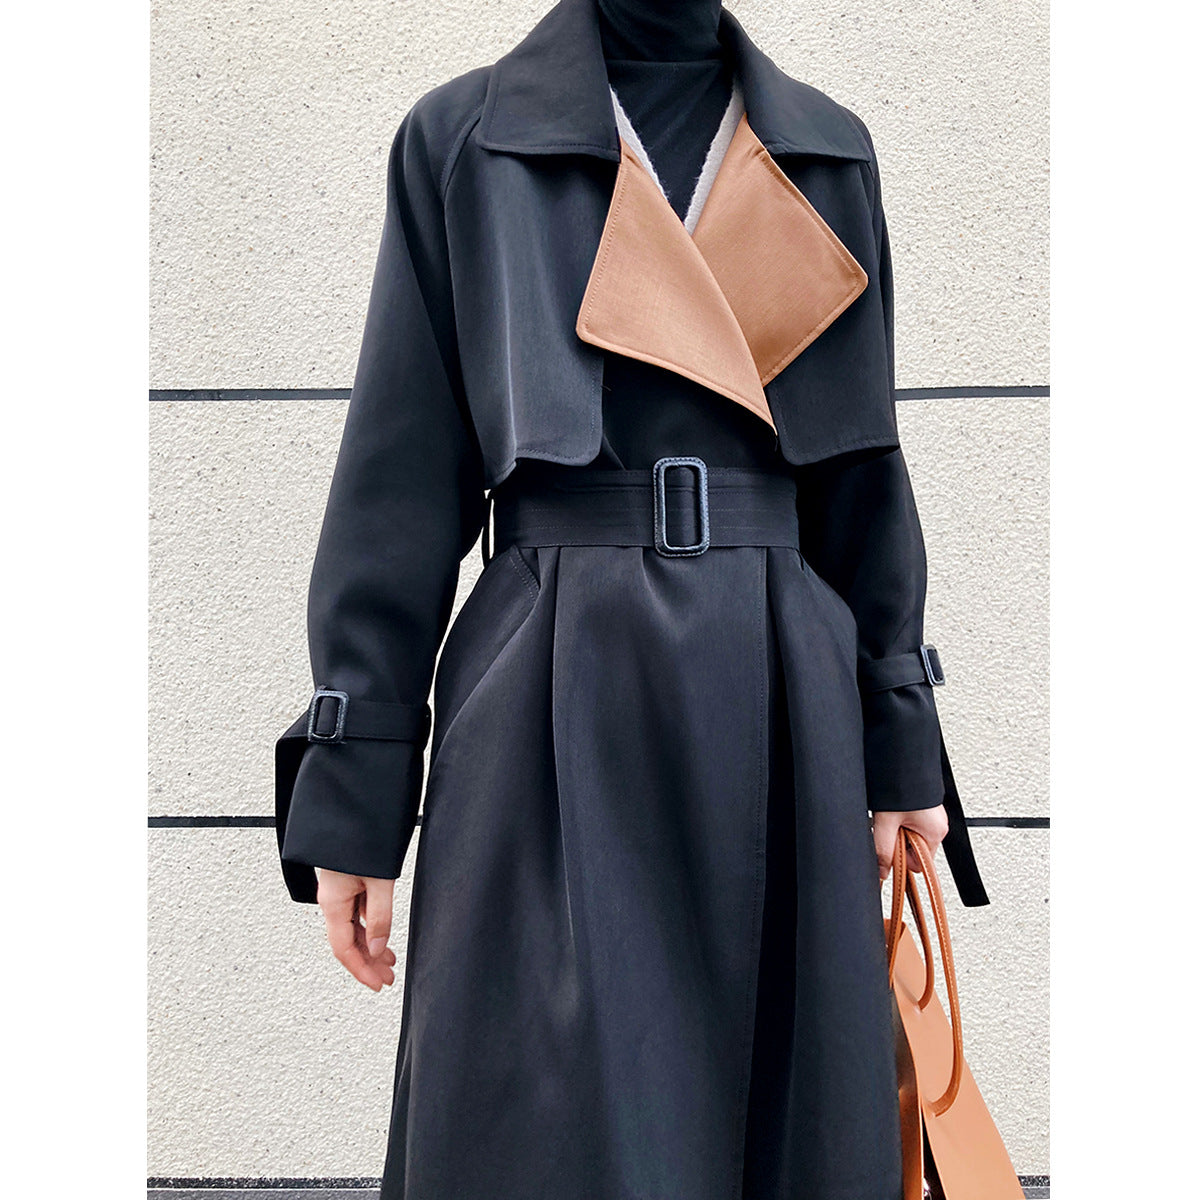 Elegant Stitching Contrast Color Trench Coat Women Mid-Length over-the-Knee Large Lapel Fashion Waist-Controlled Overcoat